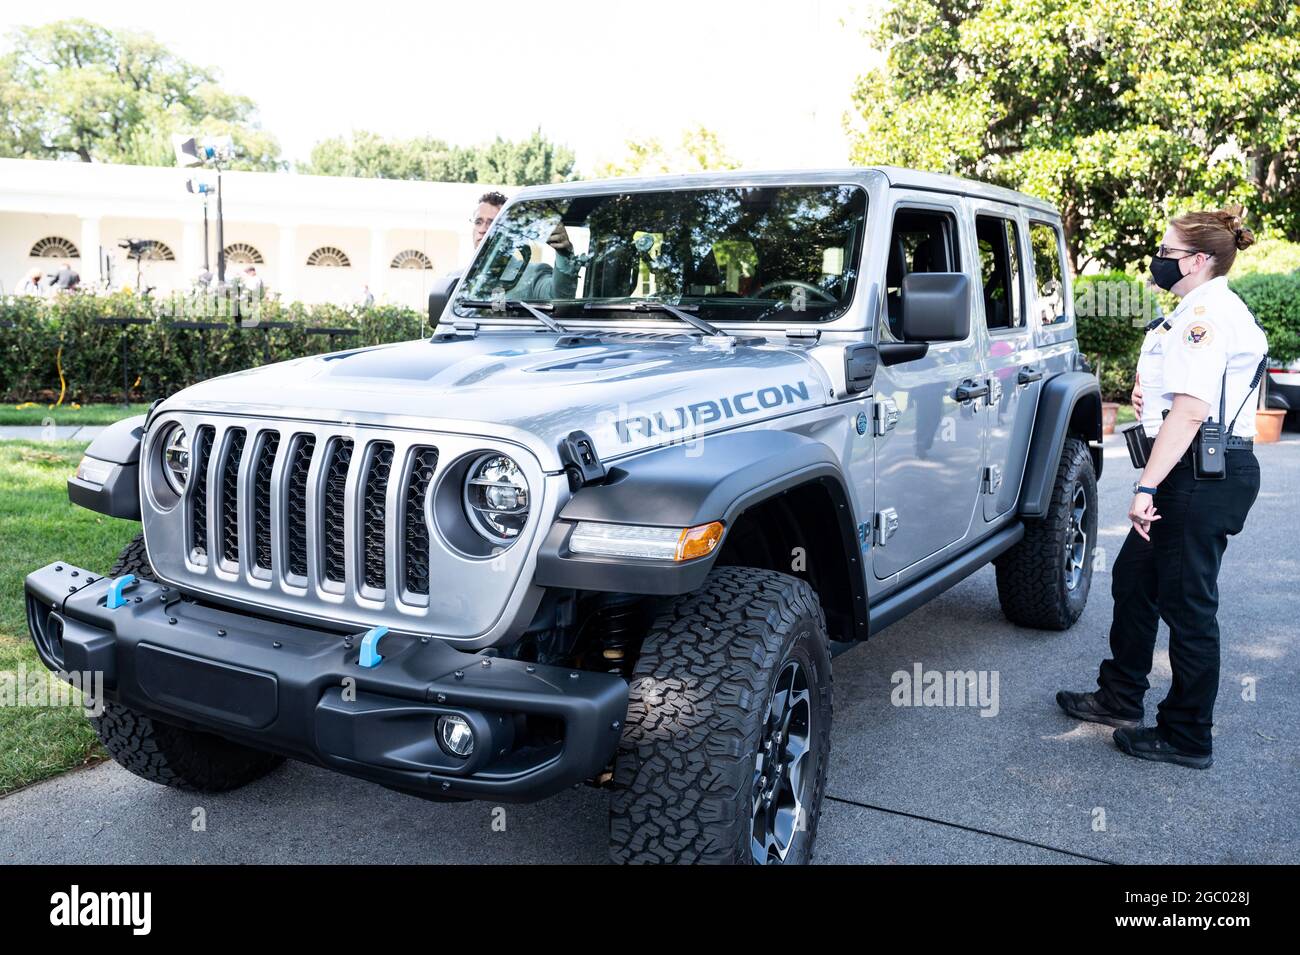 Washington, United States. 05th Aug, 2021. A member of the Secret Service  Uniformed Division looks at a Jeep Wrangler Limited Rubicon 4xE parked near  Rose Garden of the White House at an